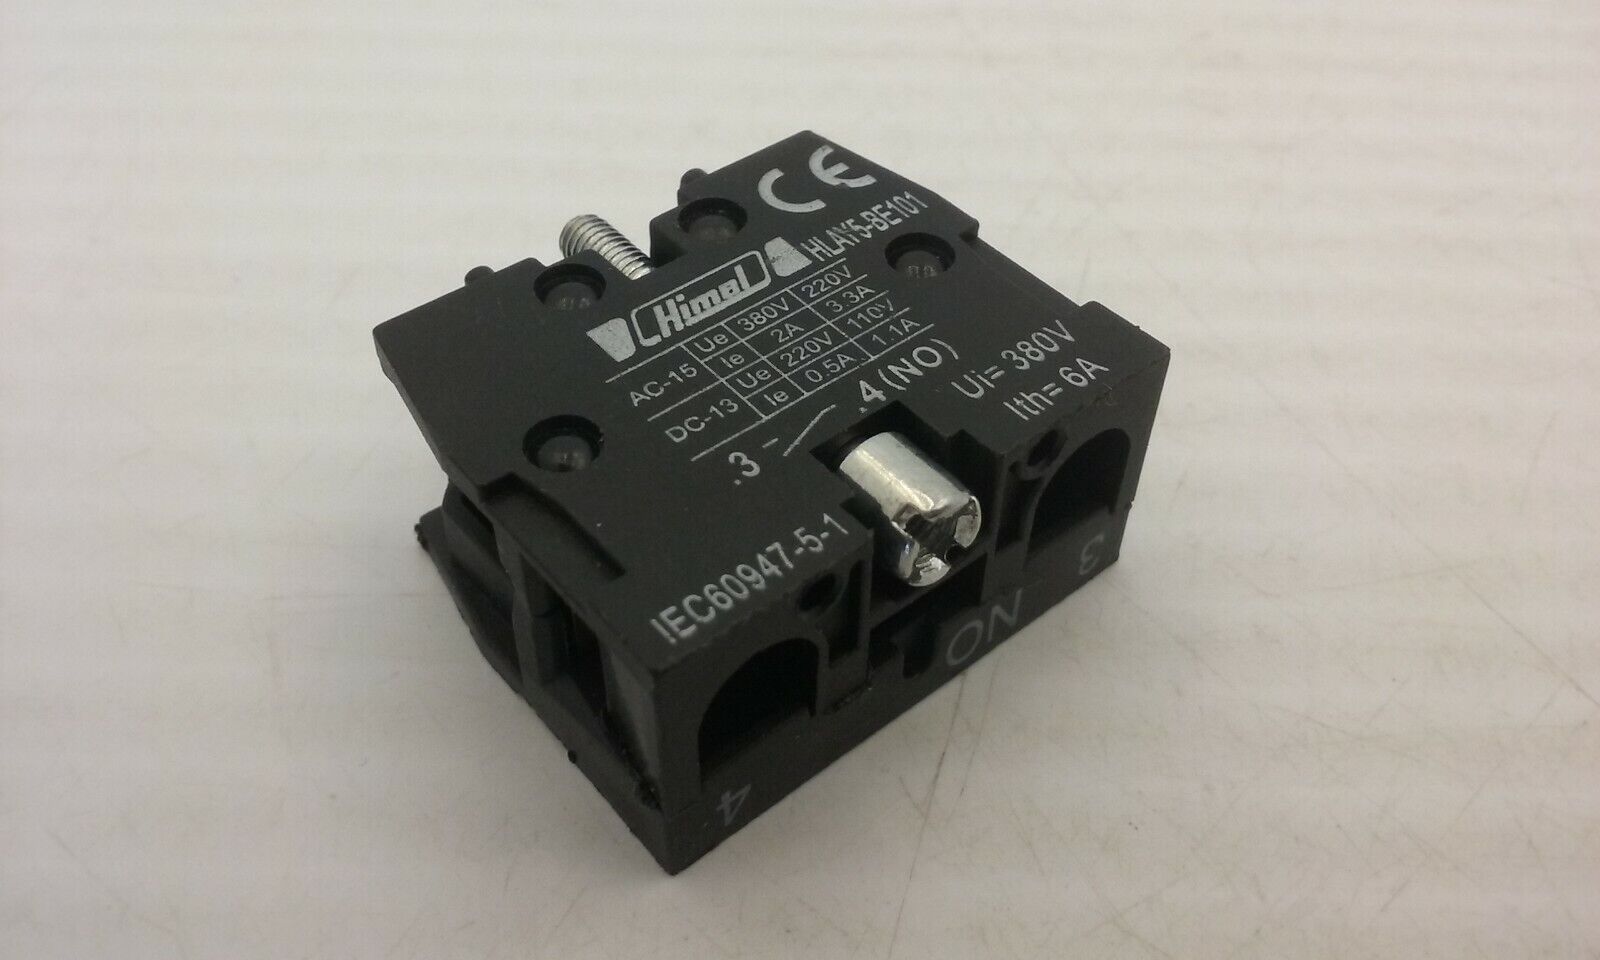 HIMEL HLAY5-BE101 PUSHBUTTON CONTACT BLOCK 380V 6A NNB